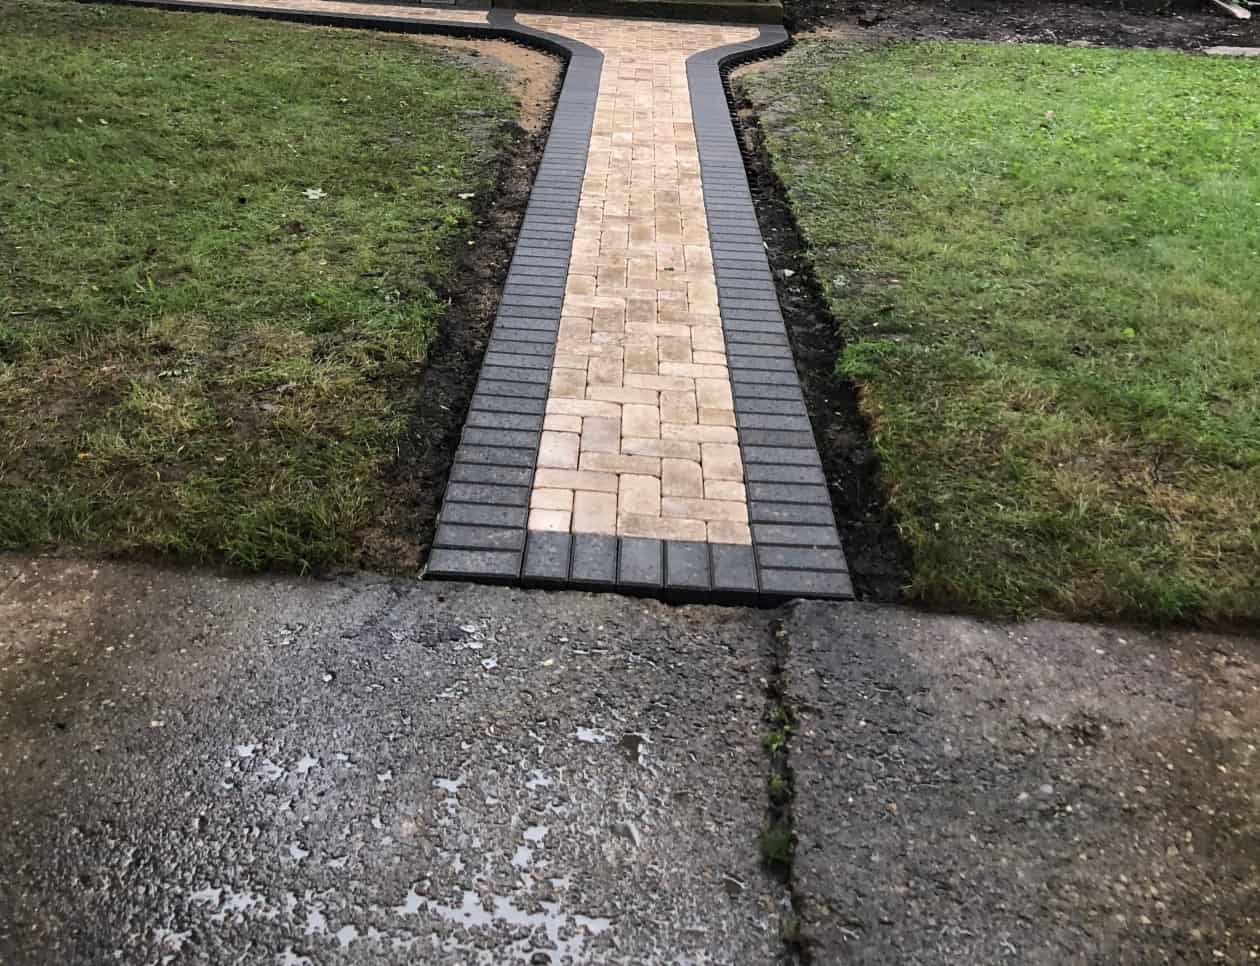 Artistic Brick Walkway Pattern by Professional Landscapers